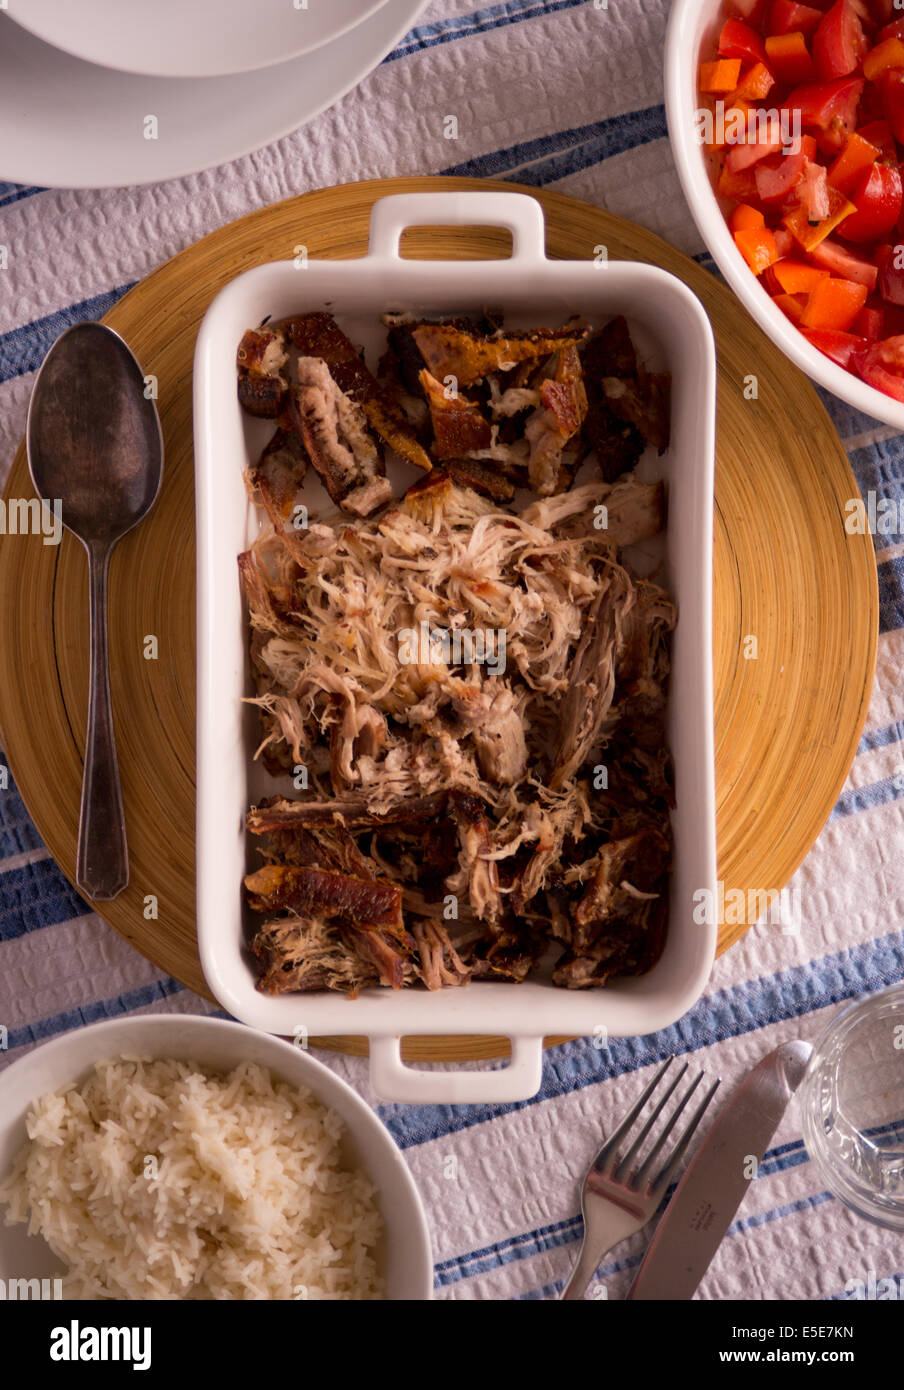 Shredded Pork belly with rice and tomato's Stock Photo